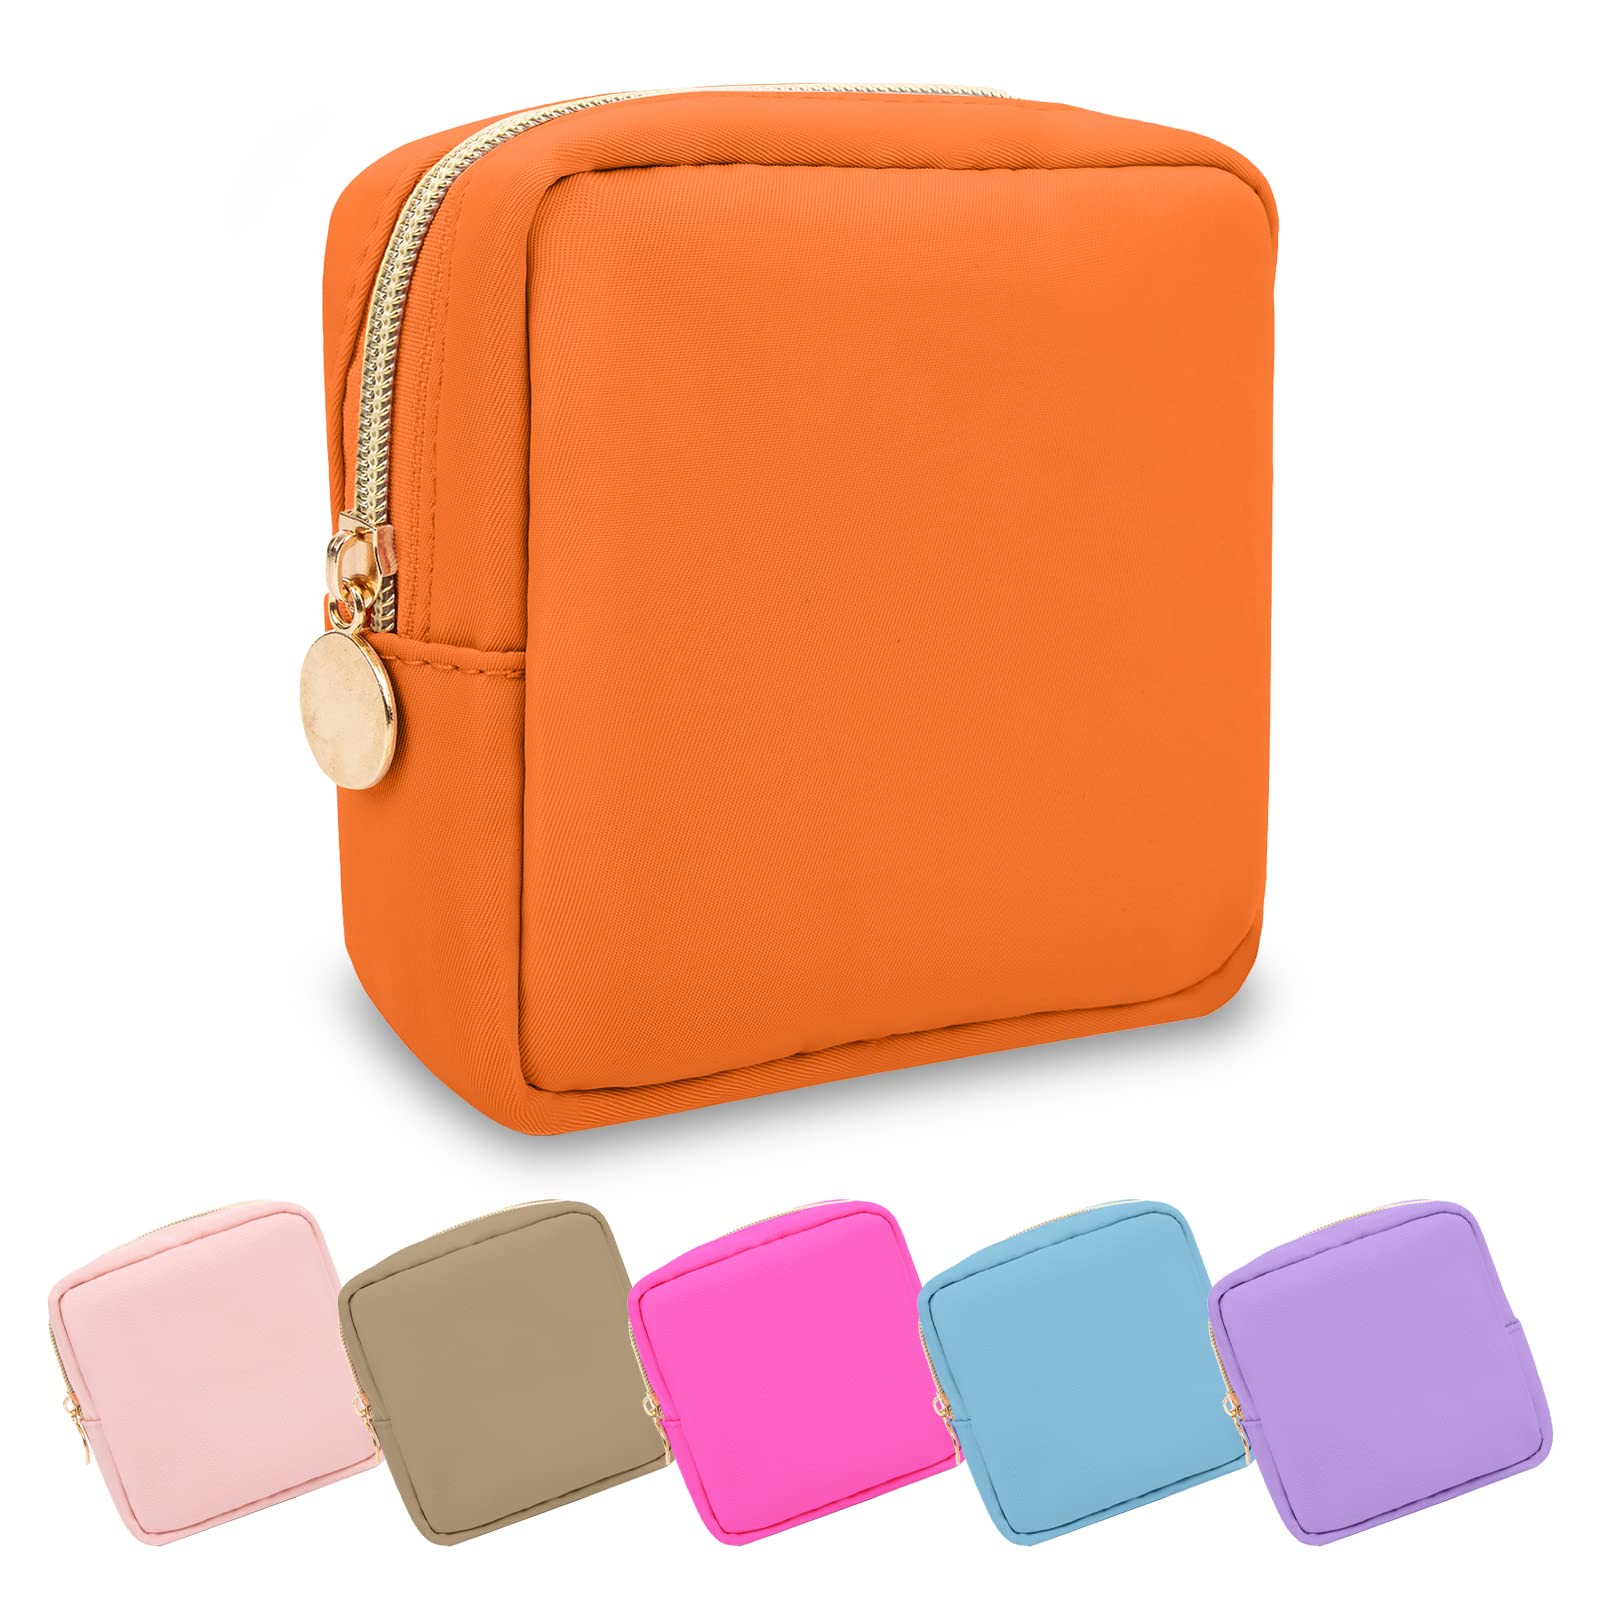 Buy Waterproof Mini Makeup Bag Pouch for Purse,Small Cosmetic